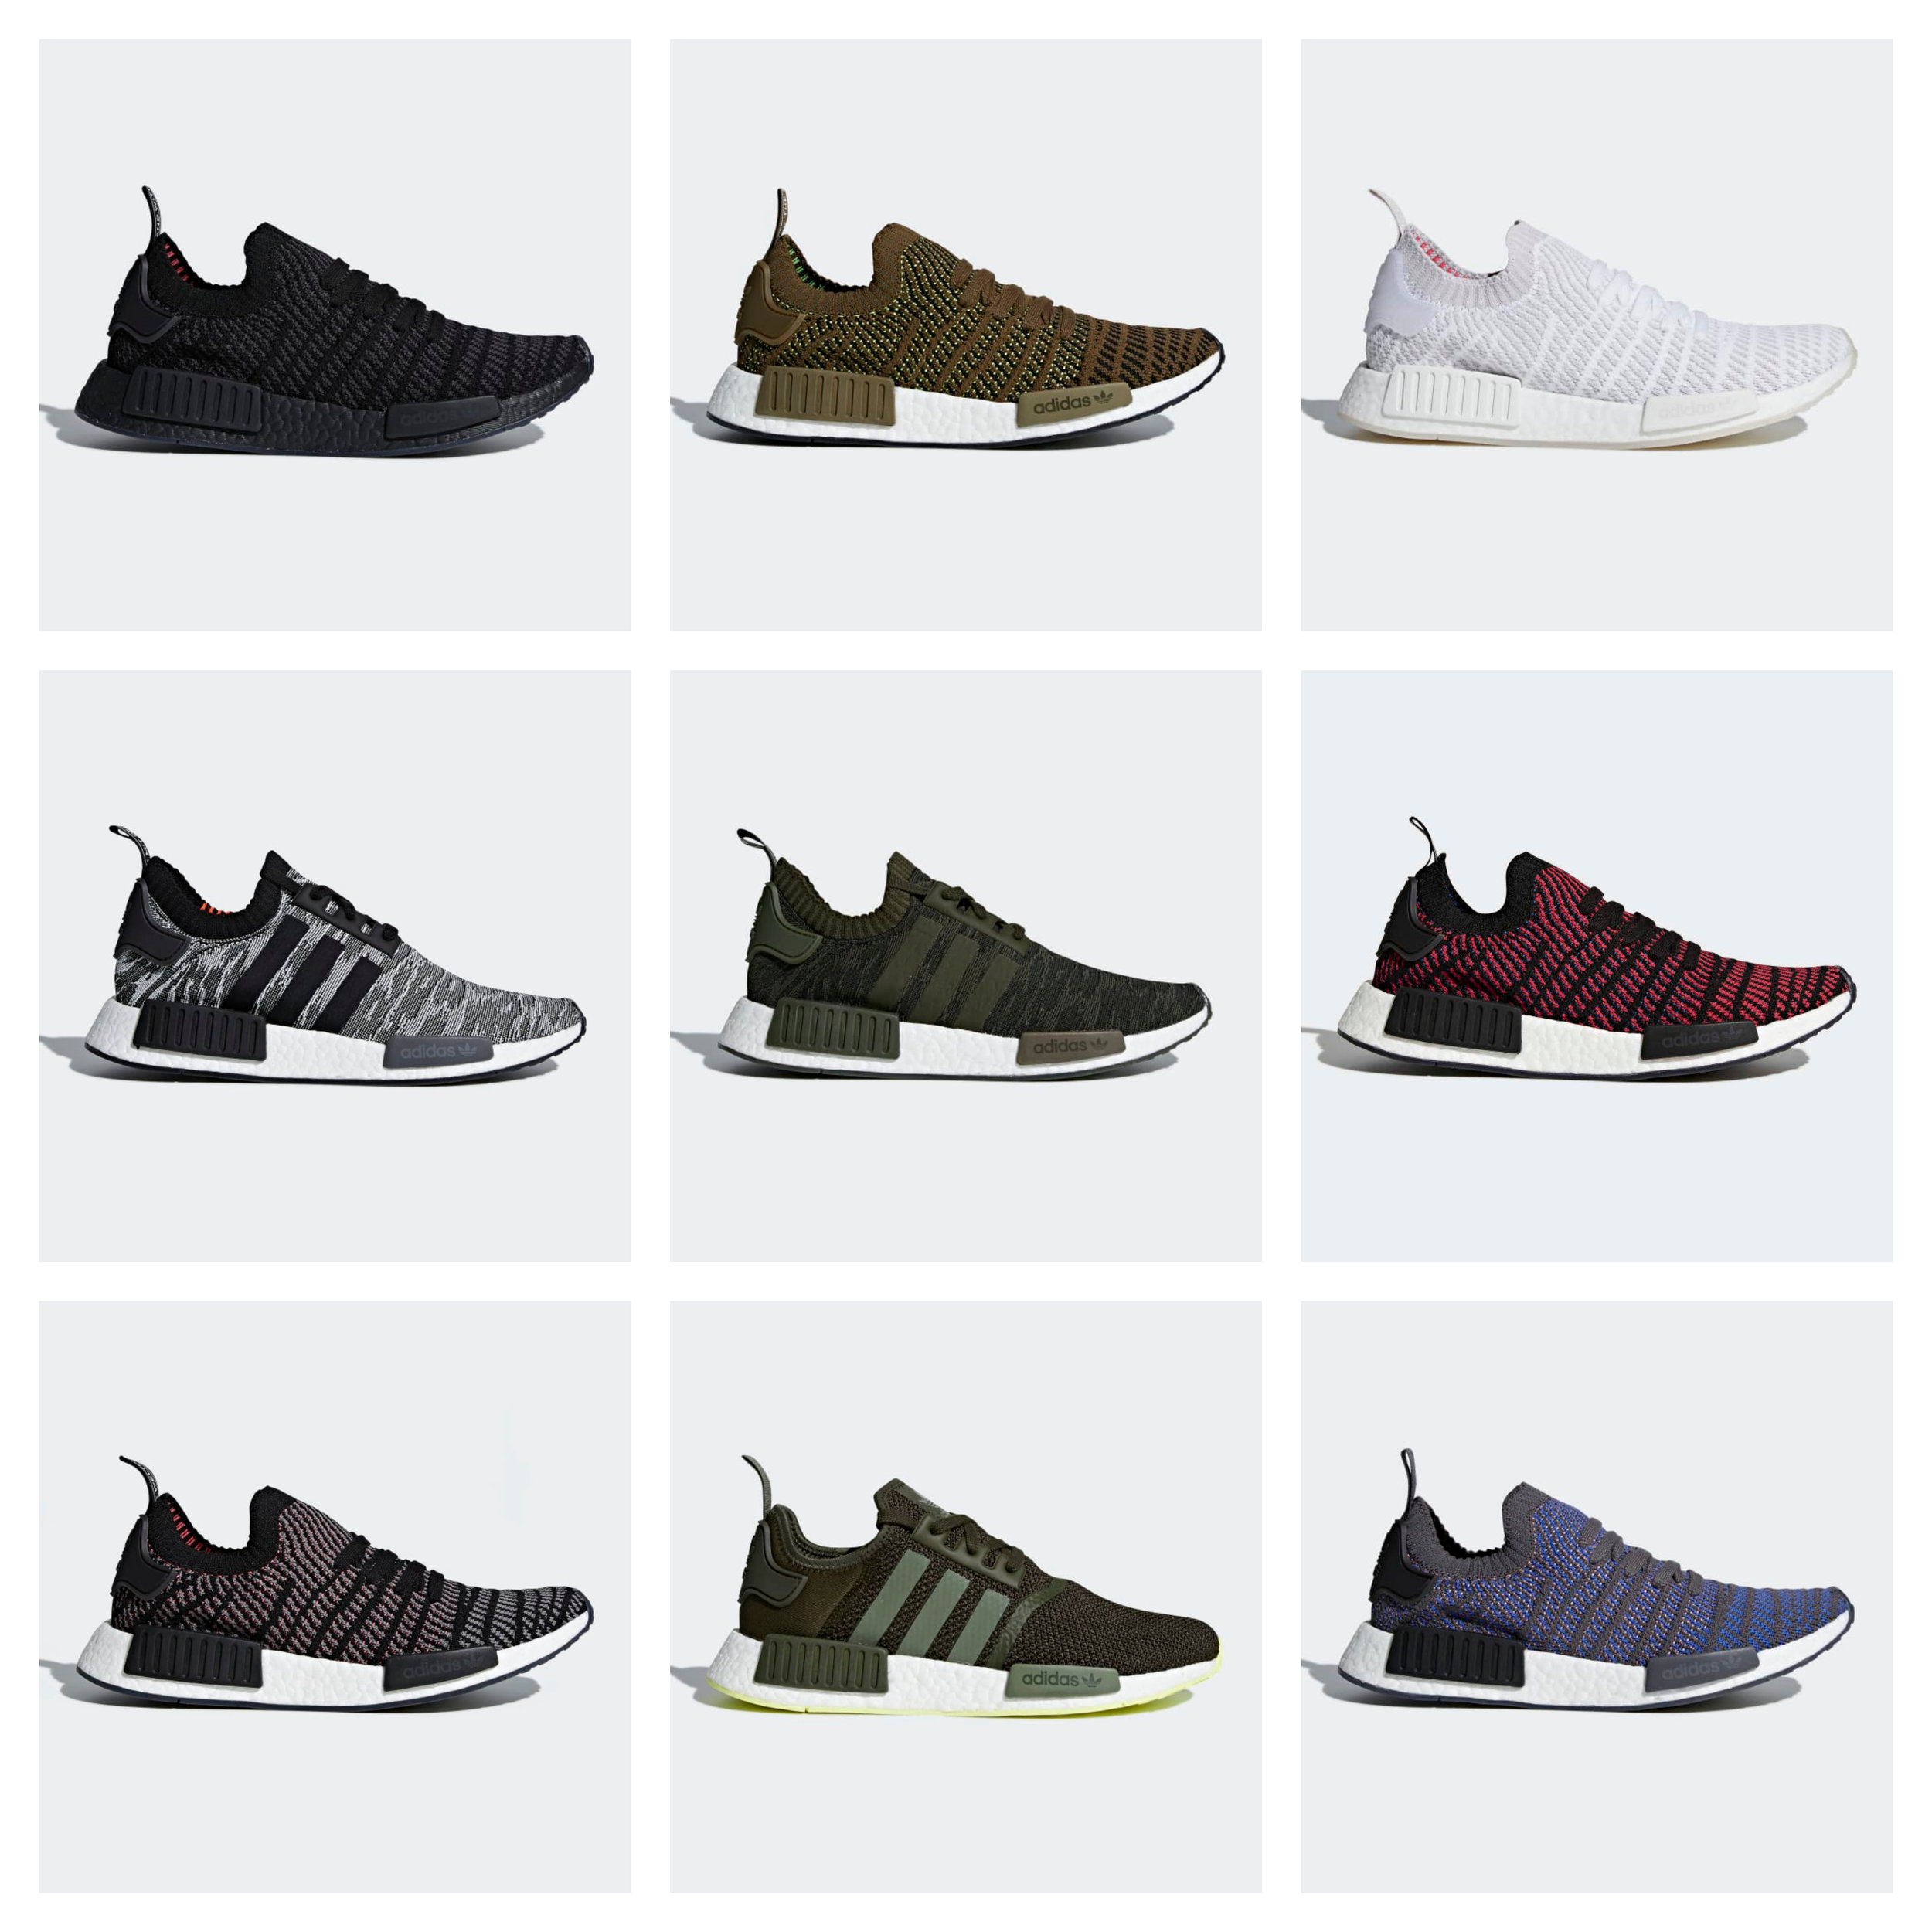 nmd r1 all colorways